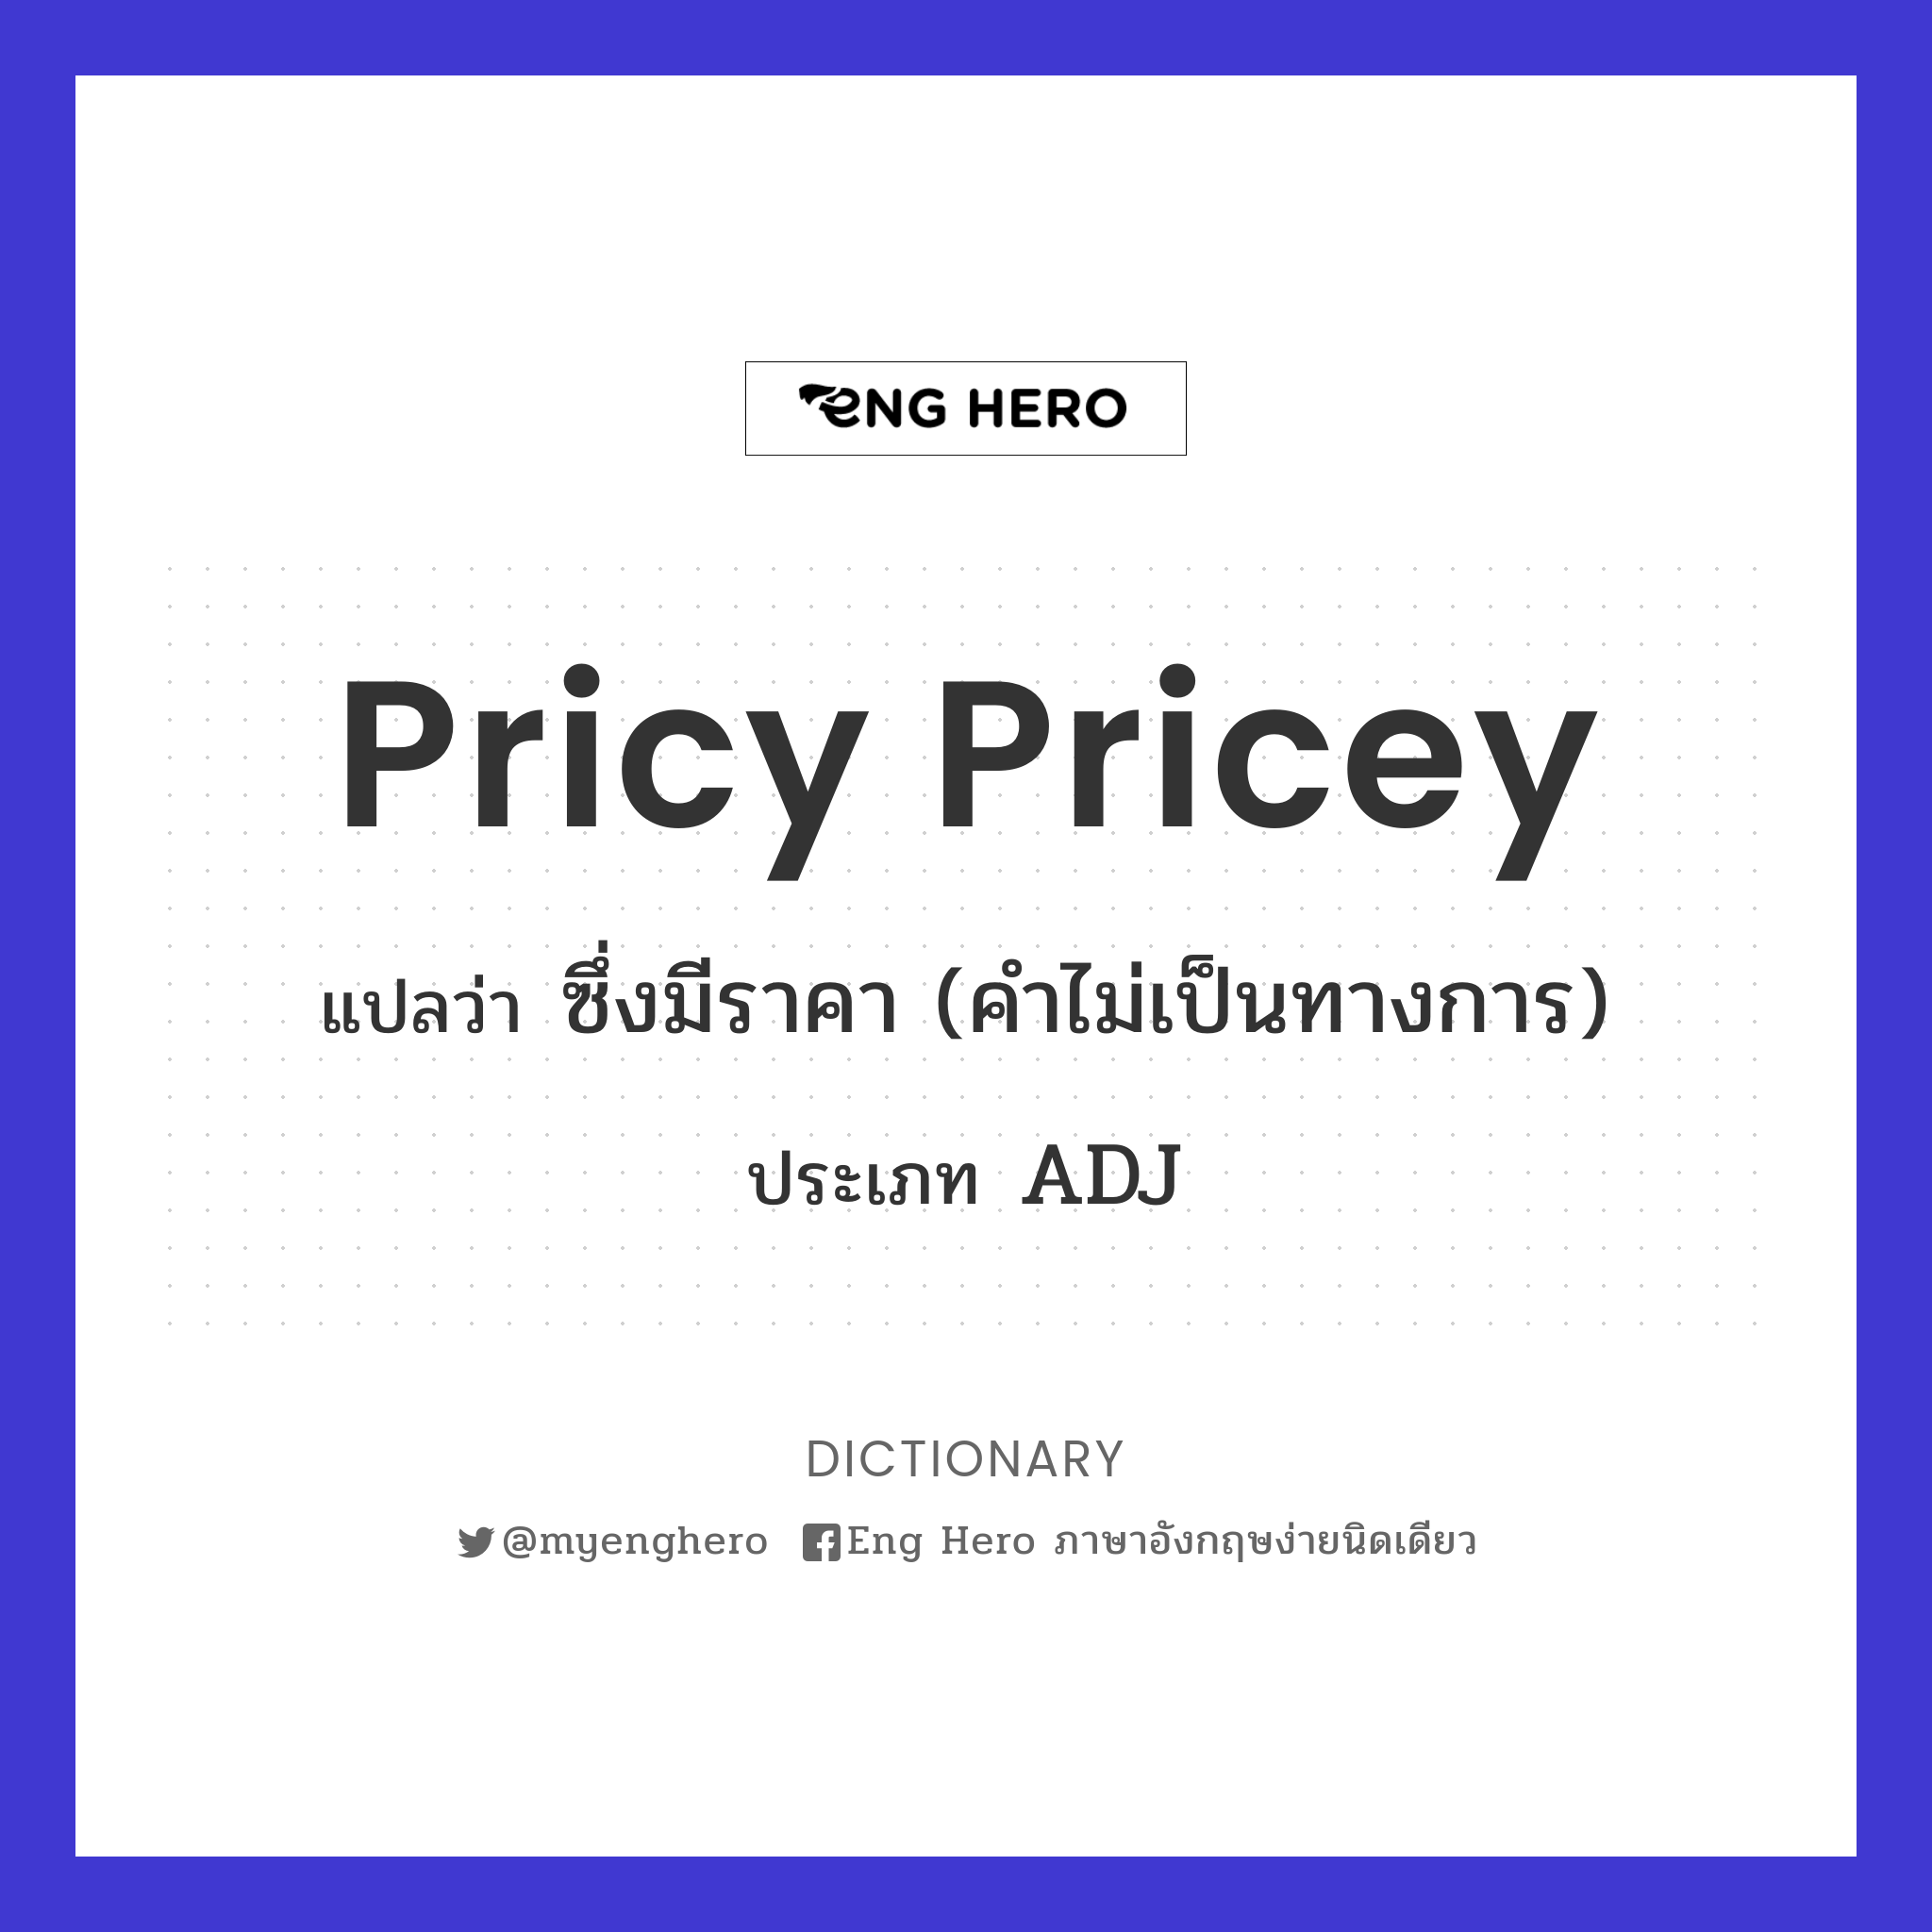 pricy pricey